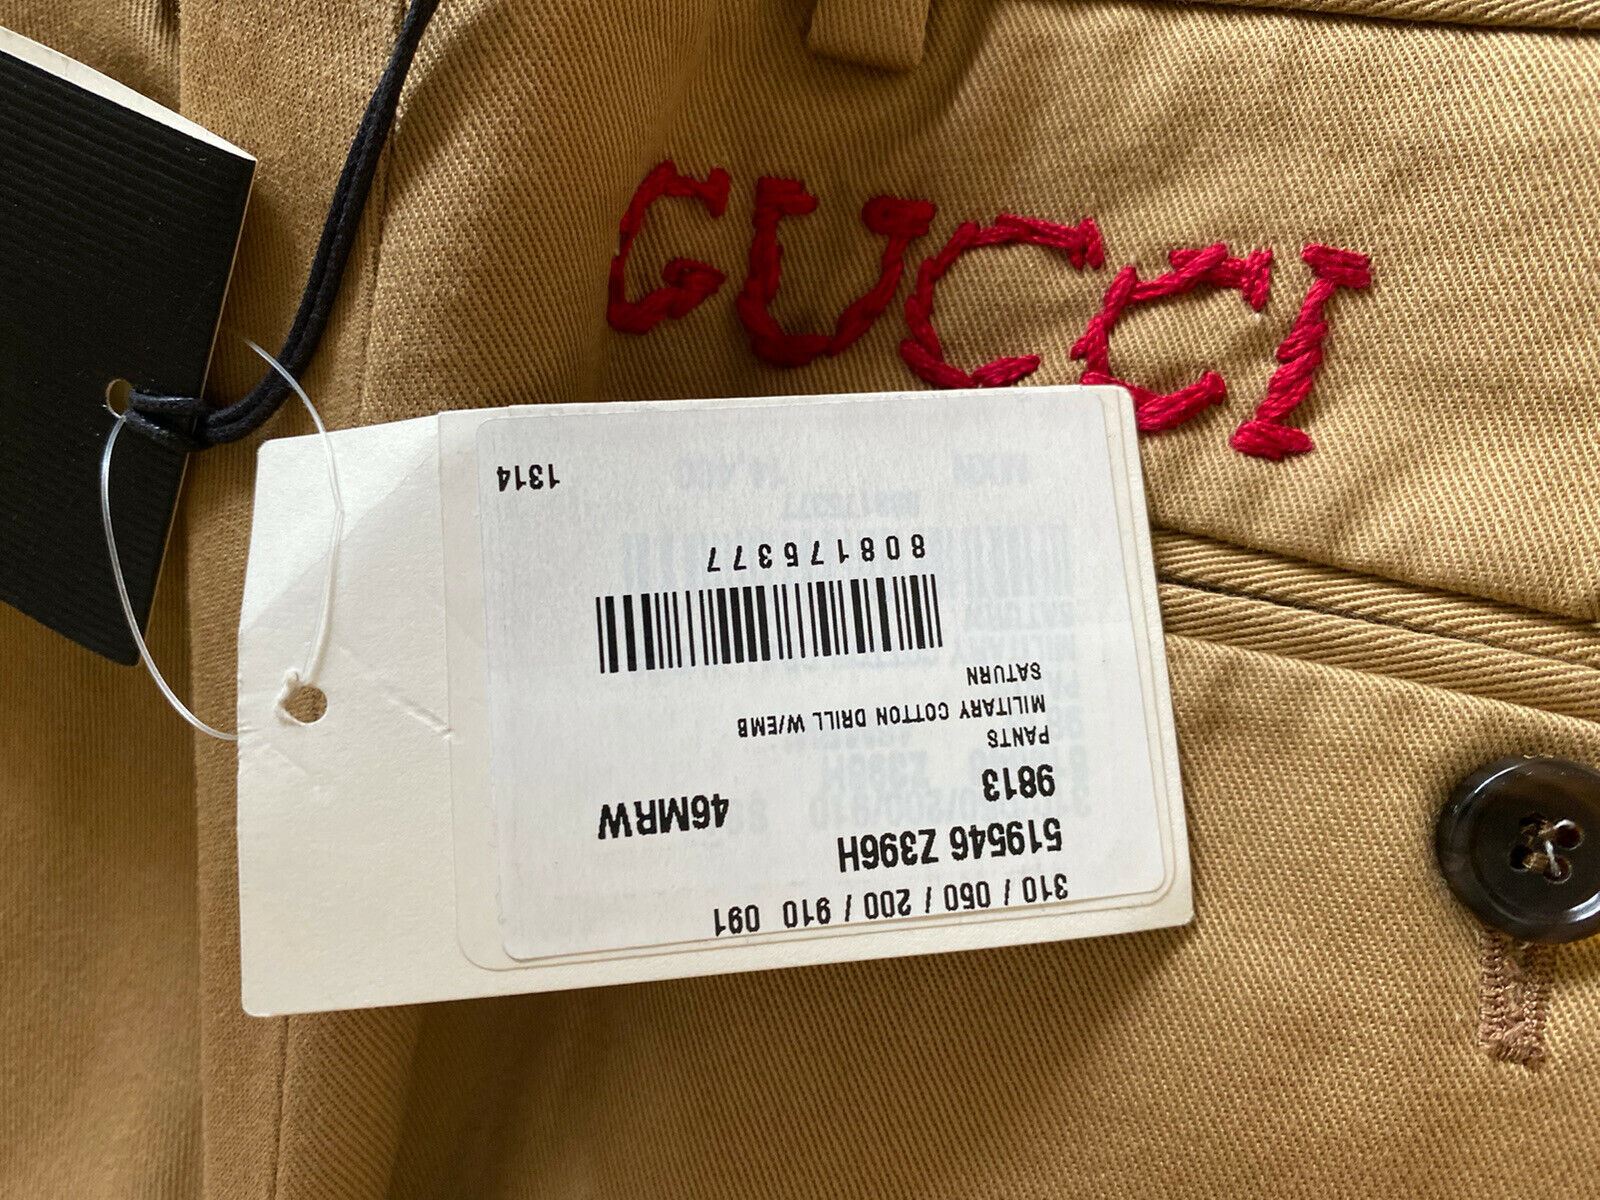 NWT Gucci Men's Brown Dress Pants 30 US (46 Euro) Made in Italy 519546